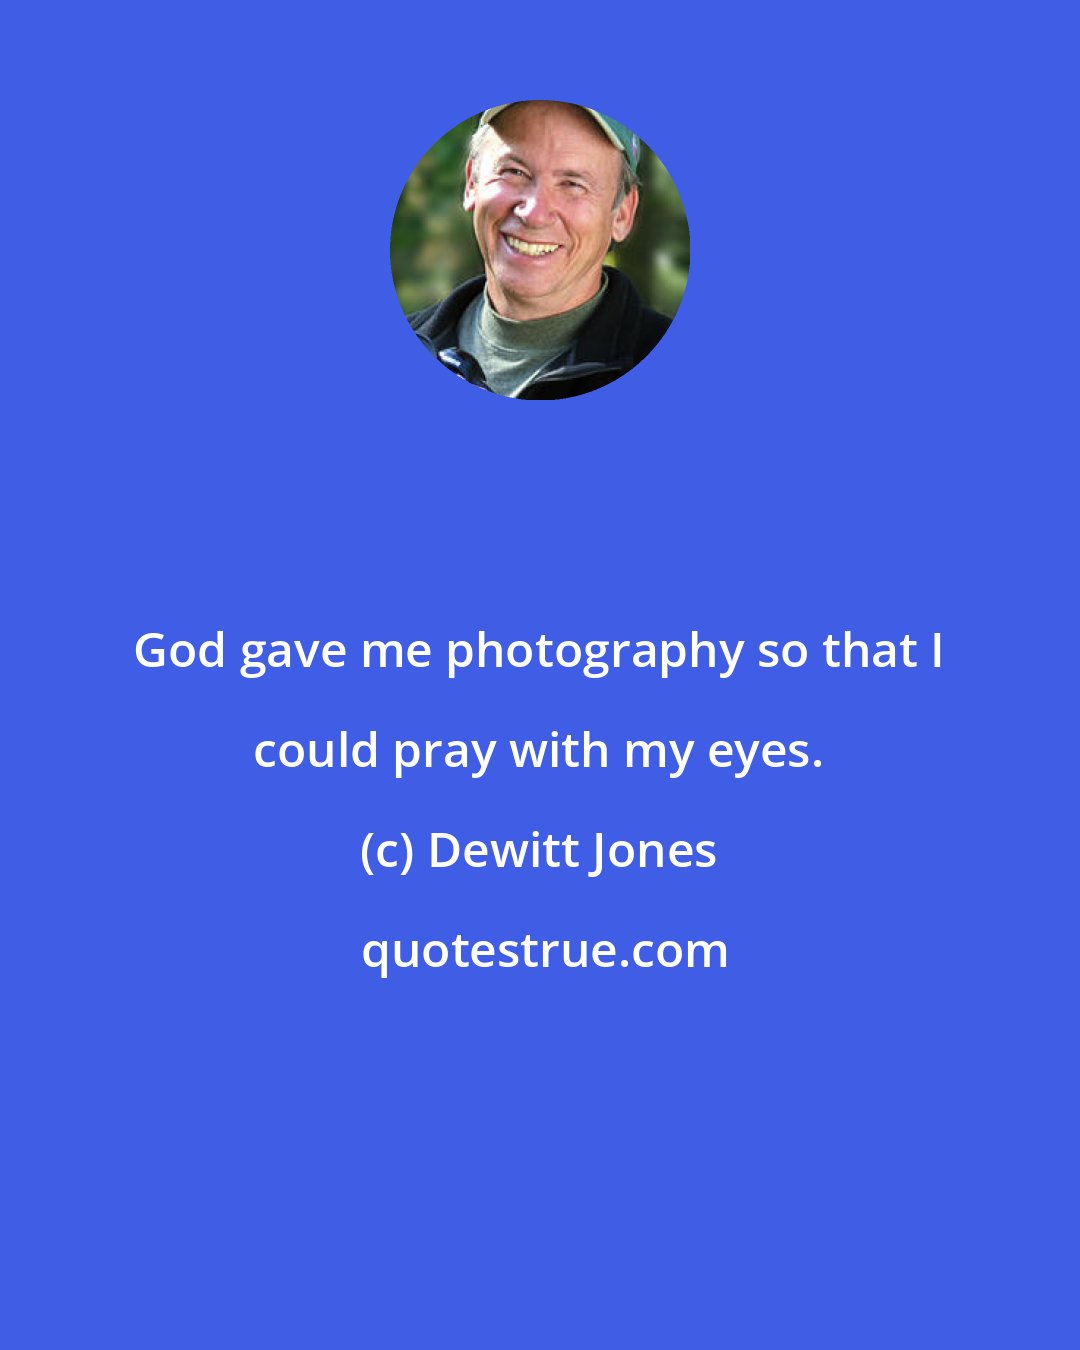 Dewitt Jones: God gave me photography so that I could pray with my eyes.